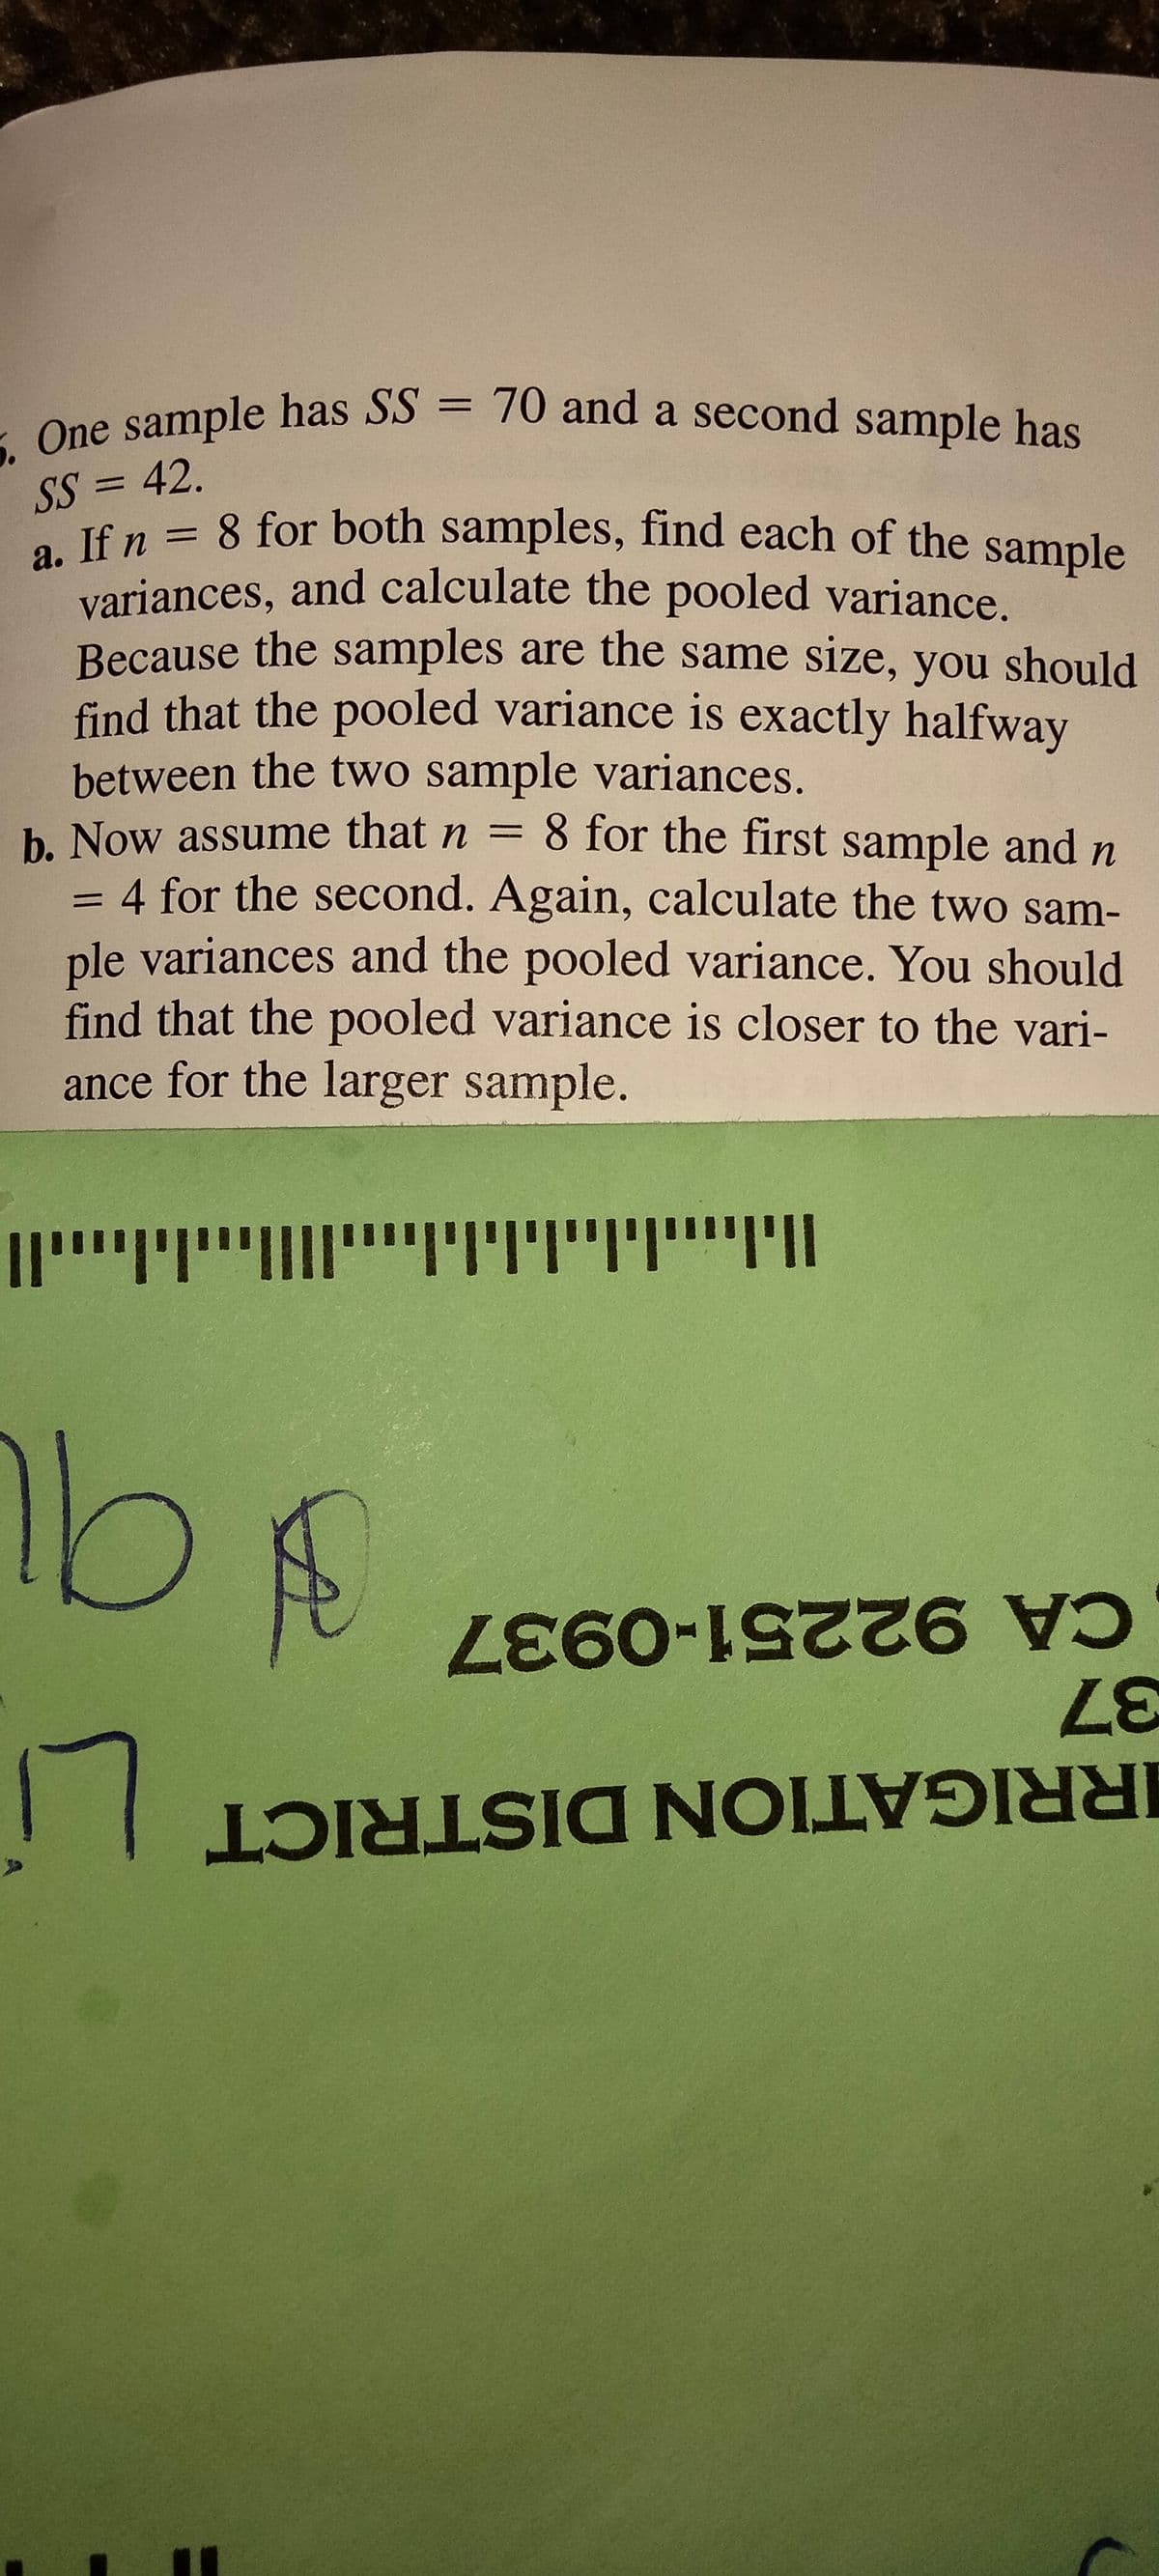 5. One sample has SS = 70 and a second sample has
variances, and calculate the pooled variance.
a. If n = 8 for both samples, find each of the sample
One sample has SS = 70 and a second sample has
%3D
SS = 42.
If n = 8 for both samples, find each of the sample
variances, and calculate the pooled variance.
Because the samples are the same size, you should
find that the pooled variance is exactly halfway
%3D
%3D
between the two sample variances.
b. Now assume that n = 8 for the first sample and n
4 for the second. Again, calculate the two sam-
ple variances and the pooled variance. You should
find that the pooled variance is closer to the vari-
ance for the larger sample.
!וייייויוי"ויויויוי
CA 92251-0937
37
17
IRRIGATION DISTRICT
4)
